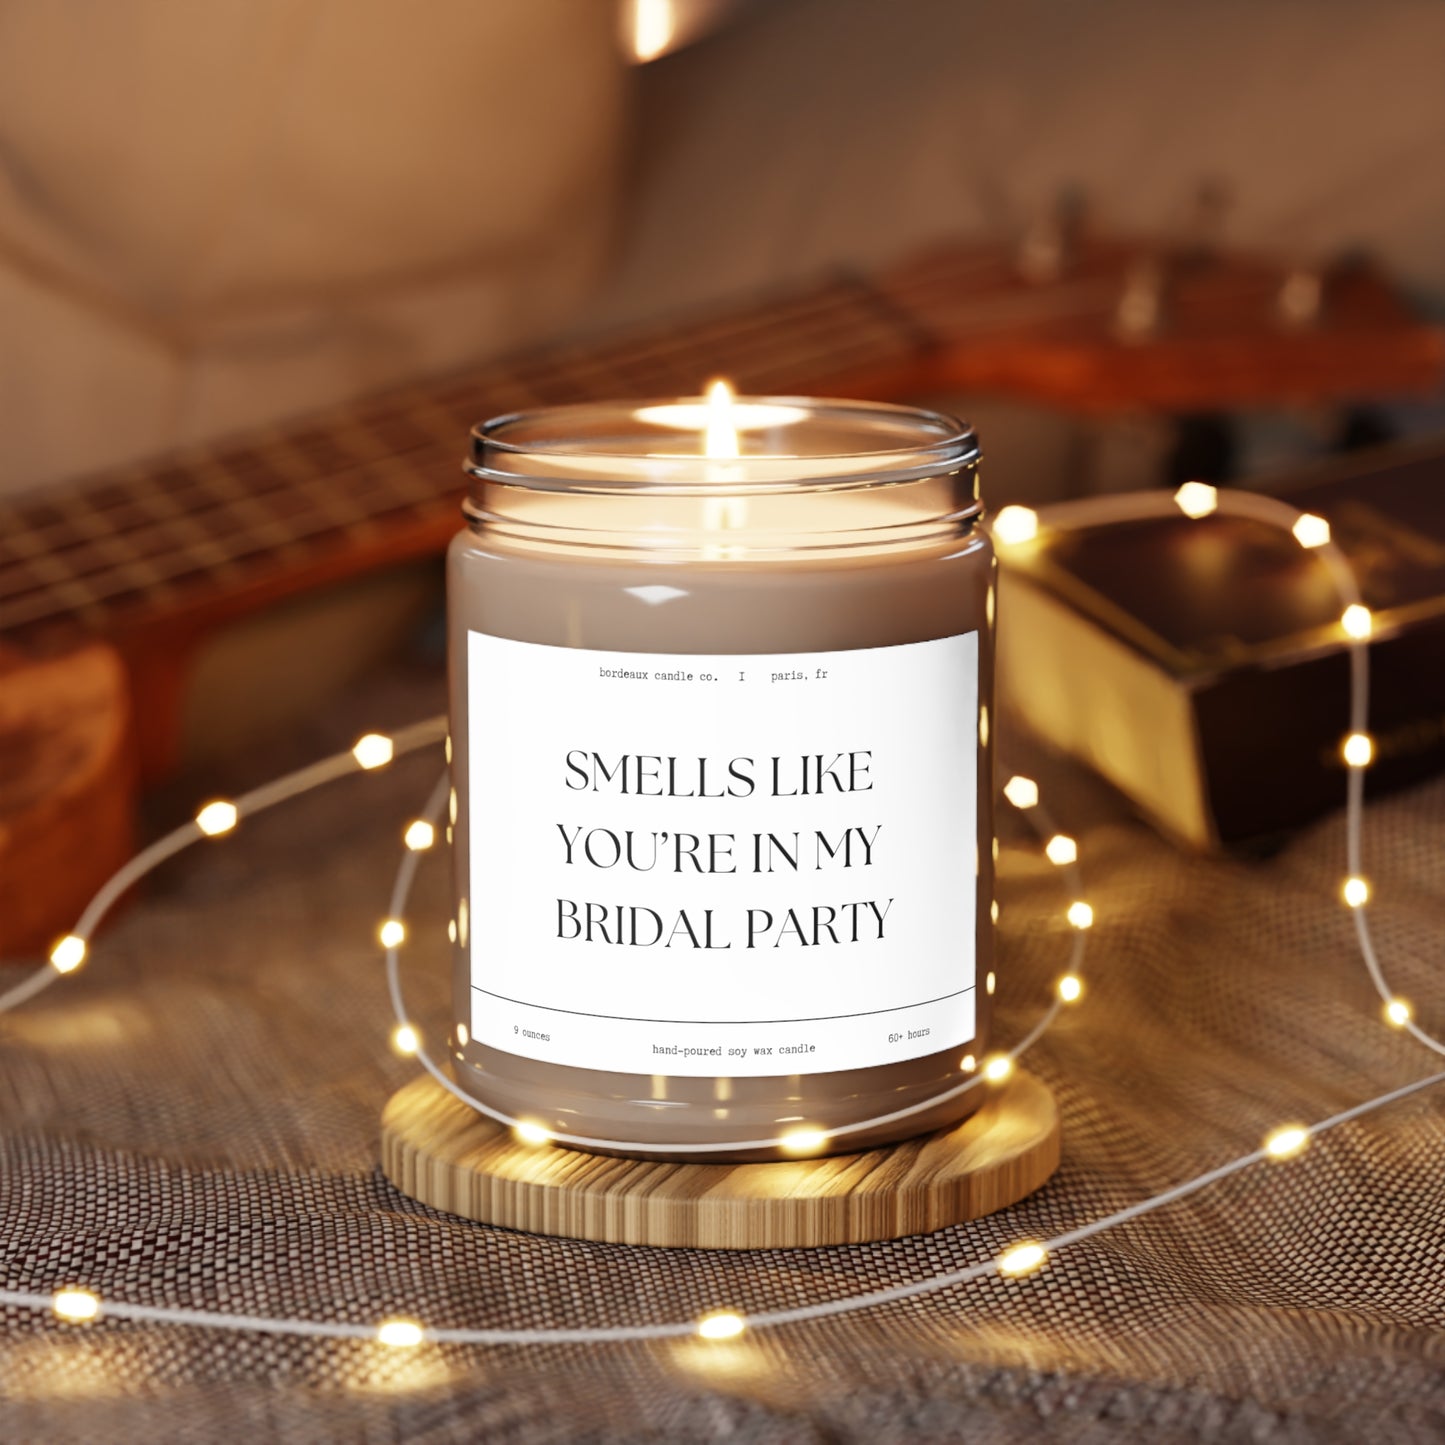 Bridesmaid Gifts Bridesmaid Proposal Bridesmaid Candle Wedding Bridesmaids' Gifts Bridesmaid Candle Smells Like Youre In The Bridal Party, Scented Candles, 9oz